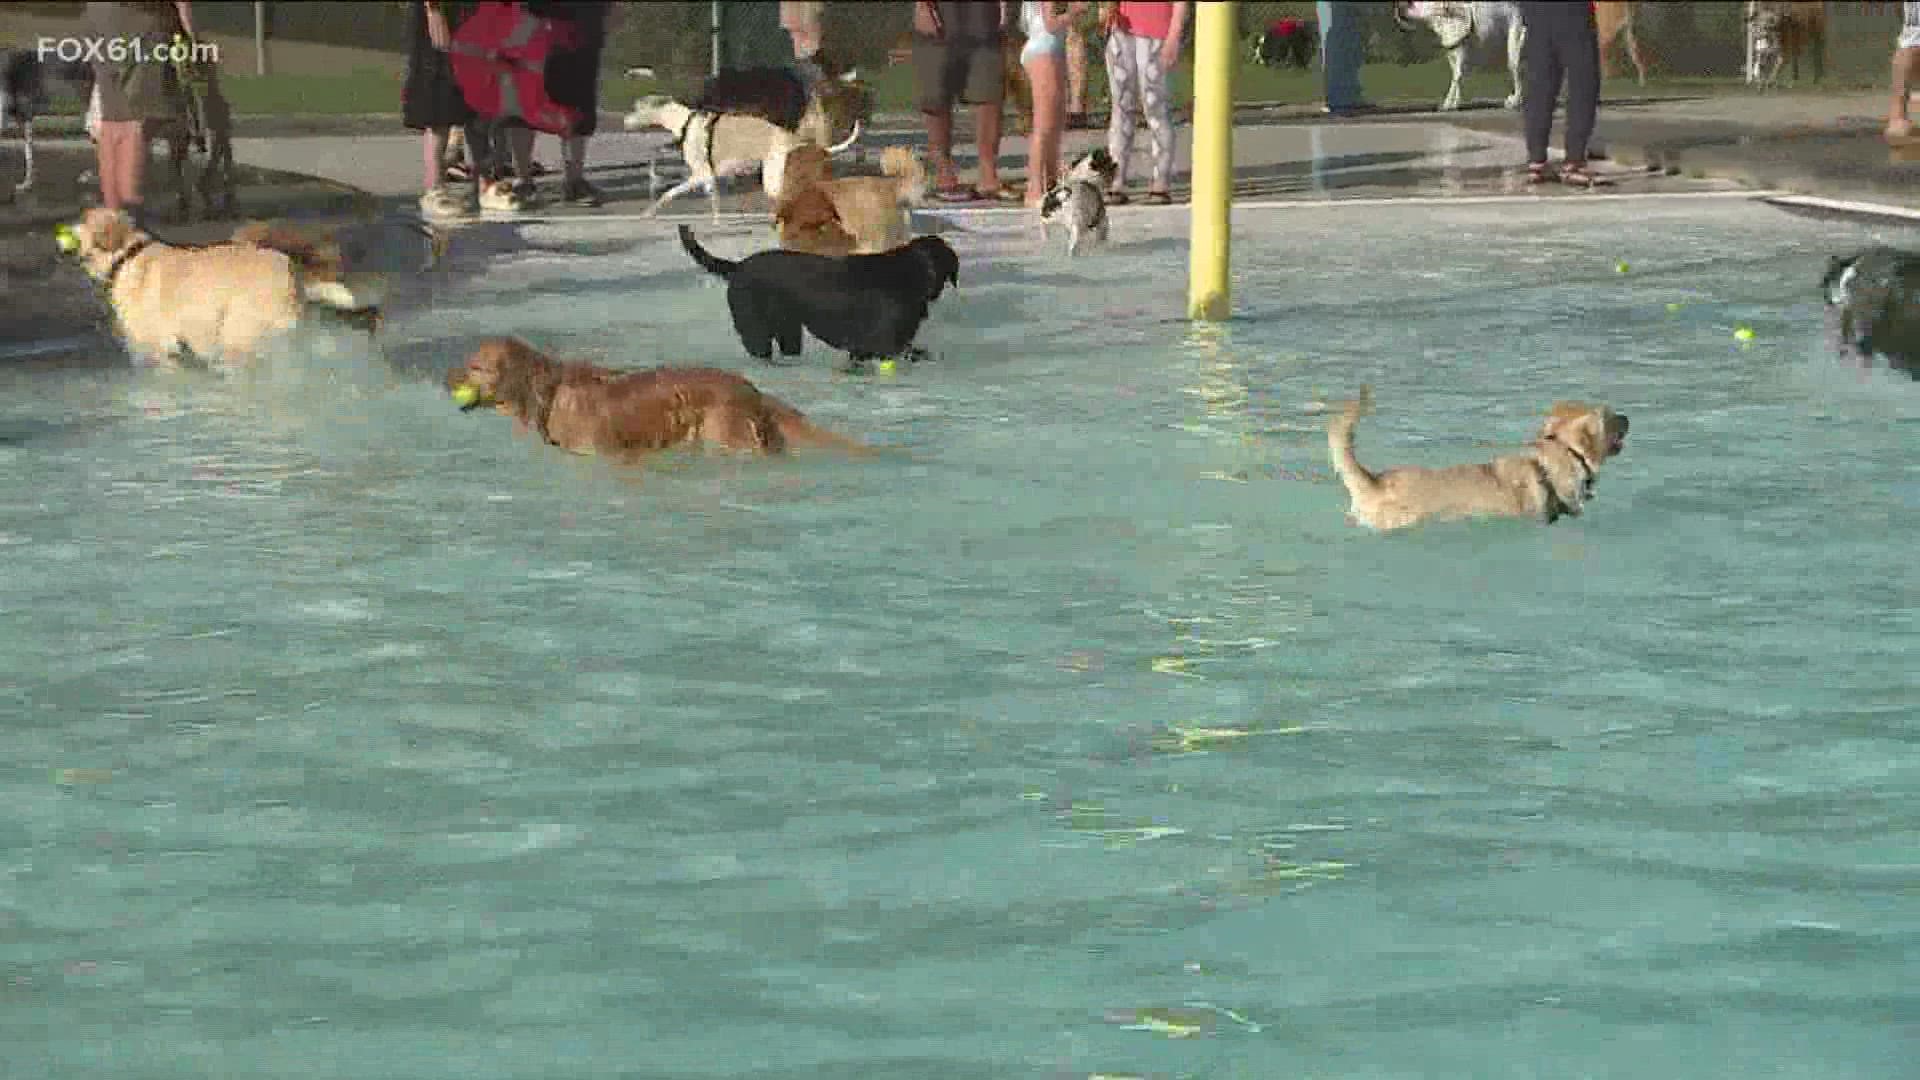 It’s still the dog days of summer in West Hartford, where dogs got a chance to enjoy the pool for the Pooch Plunge.